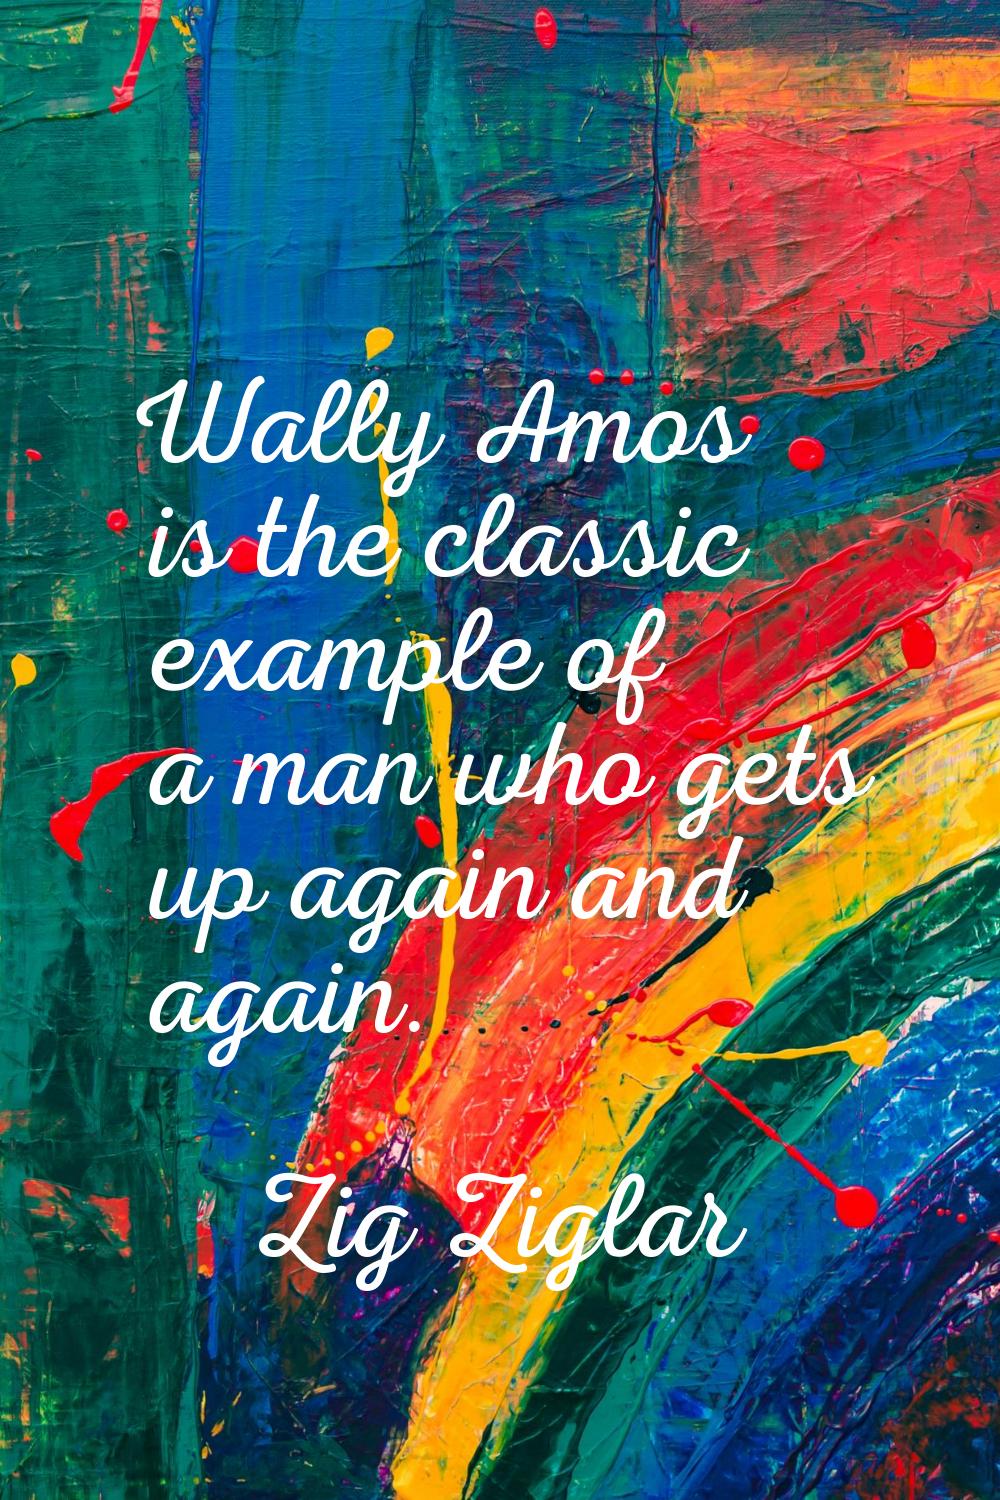 Wally Amos is the classic example of a man who gets up again and again.